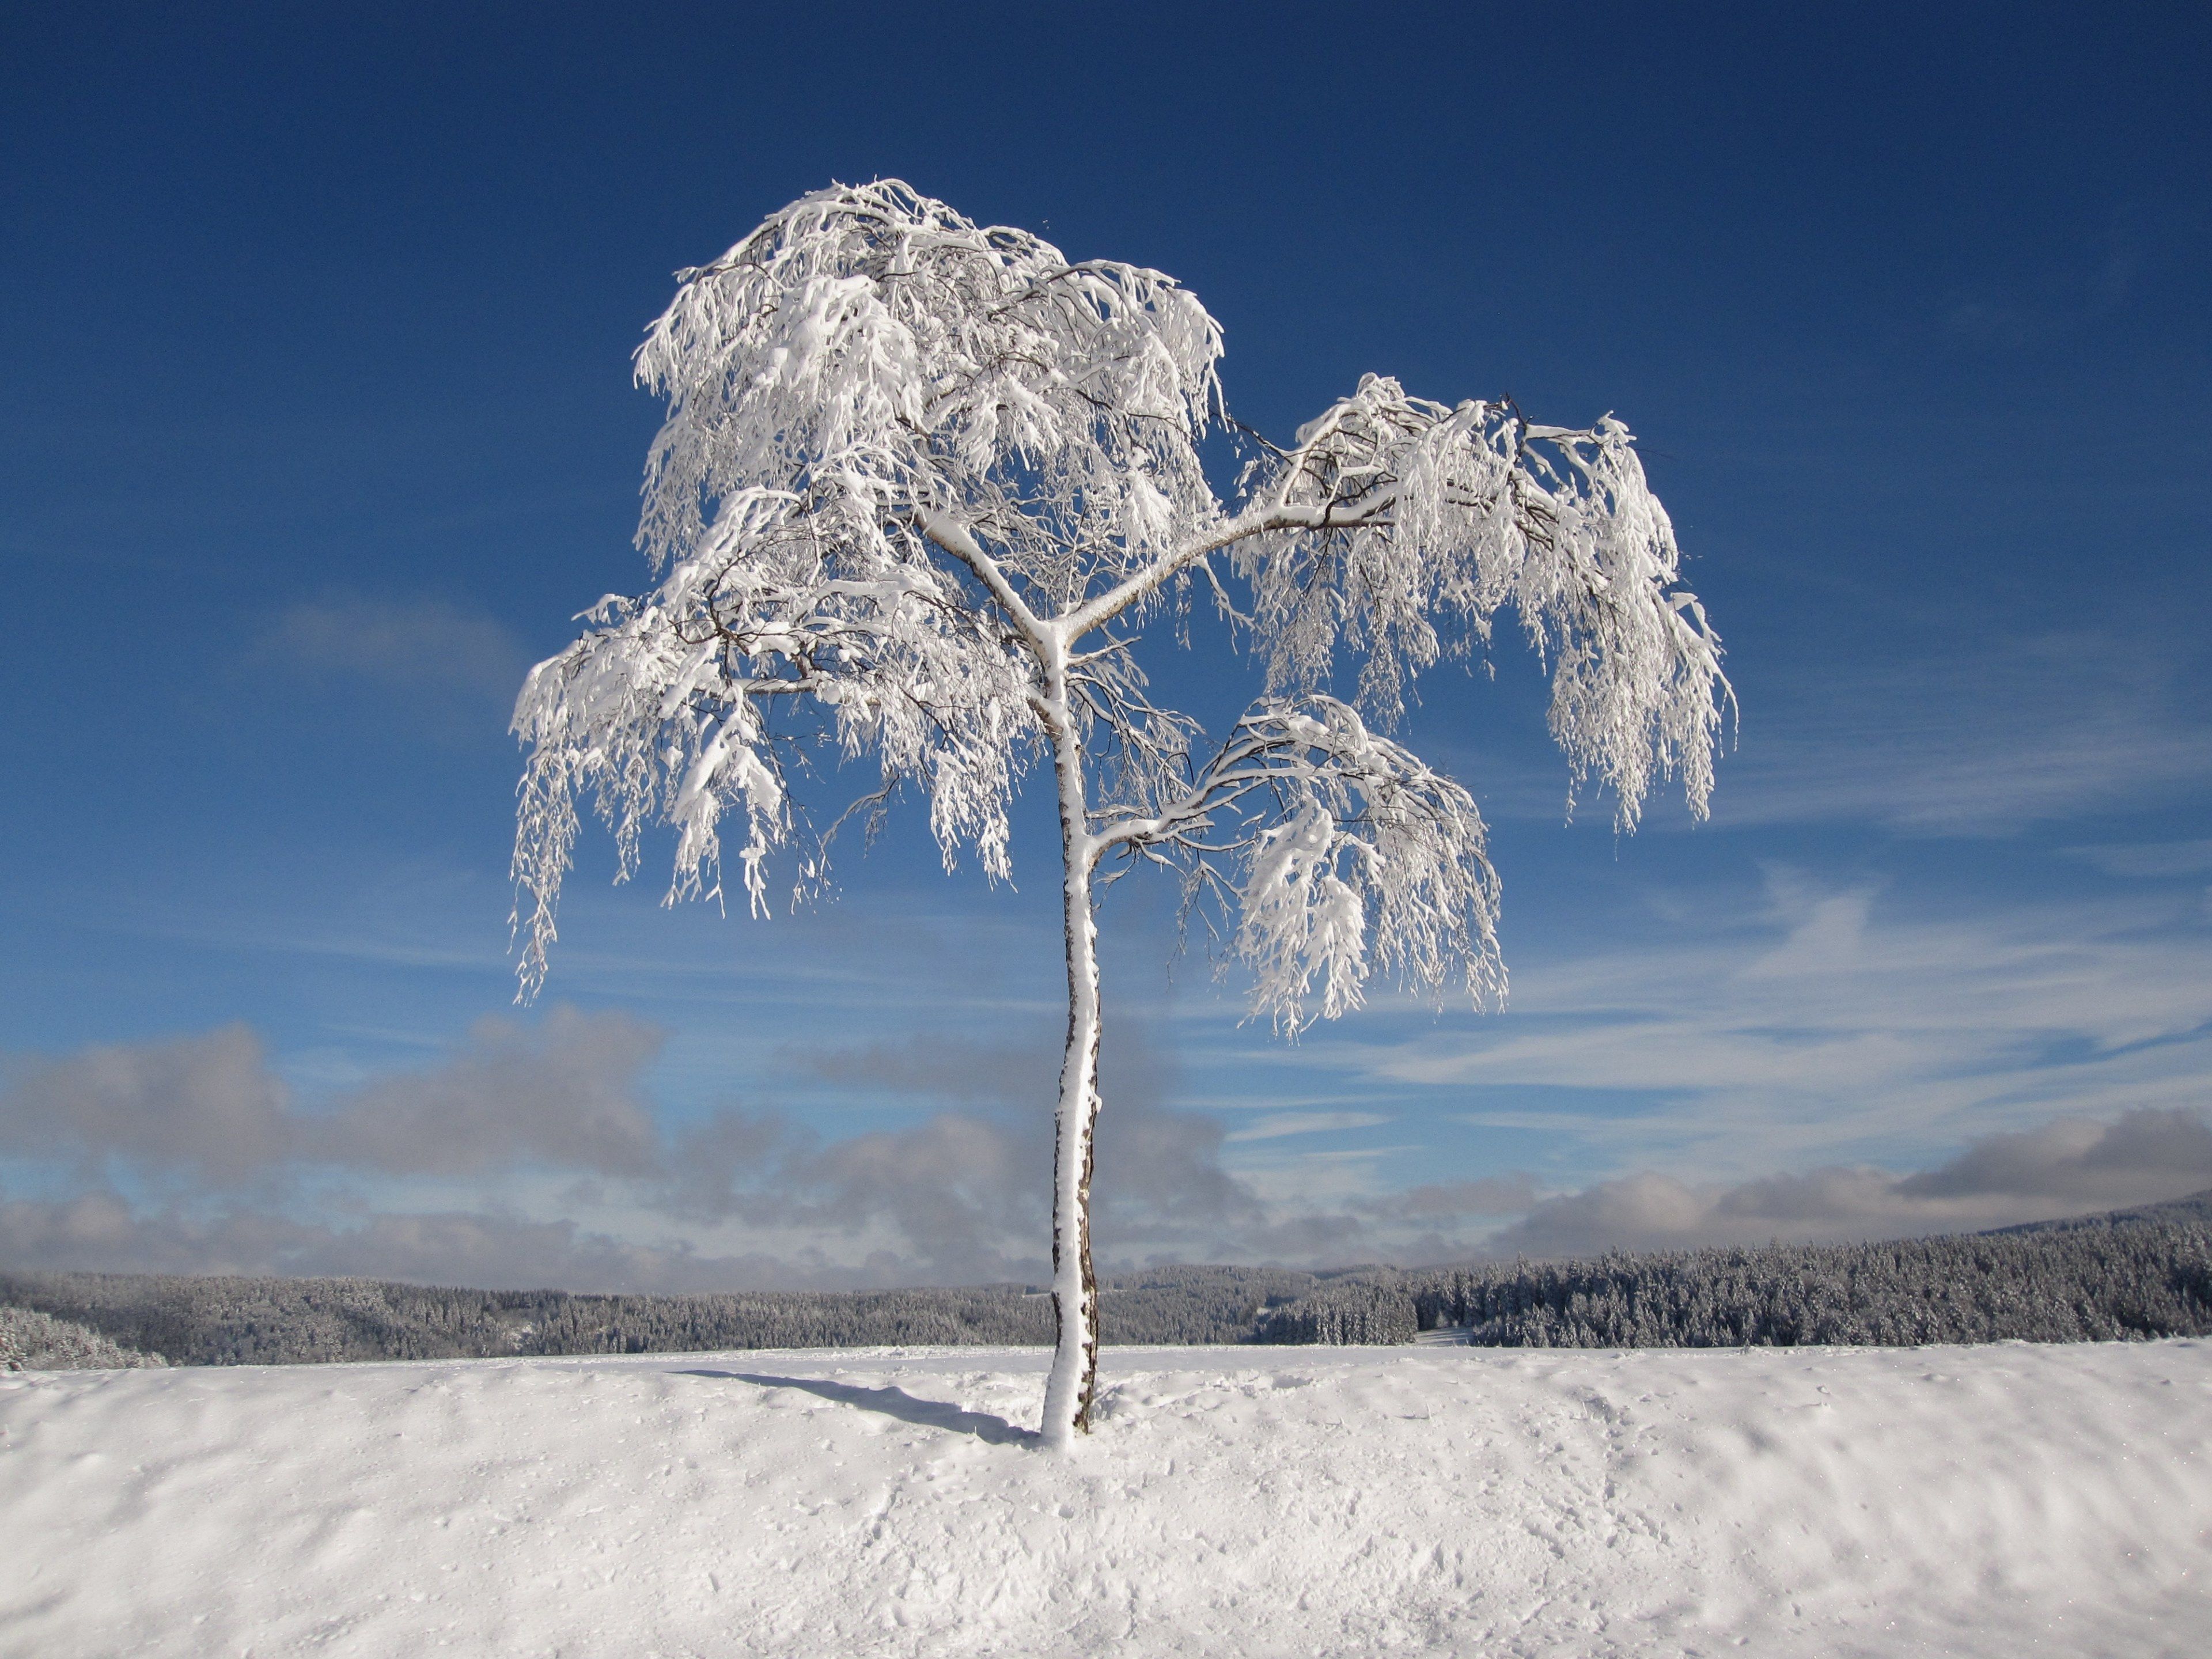 winter #snowy #firs #christmas #cold #snow #white #blue 4k wallpaper